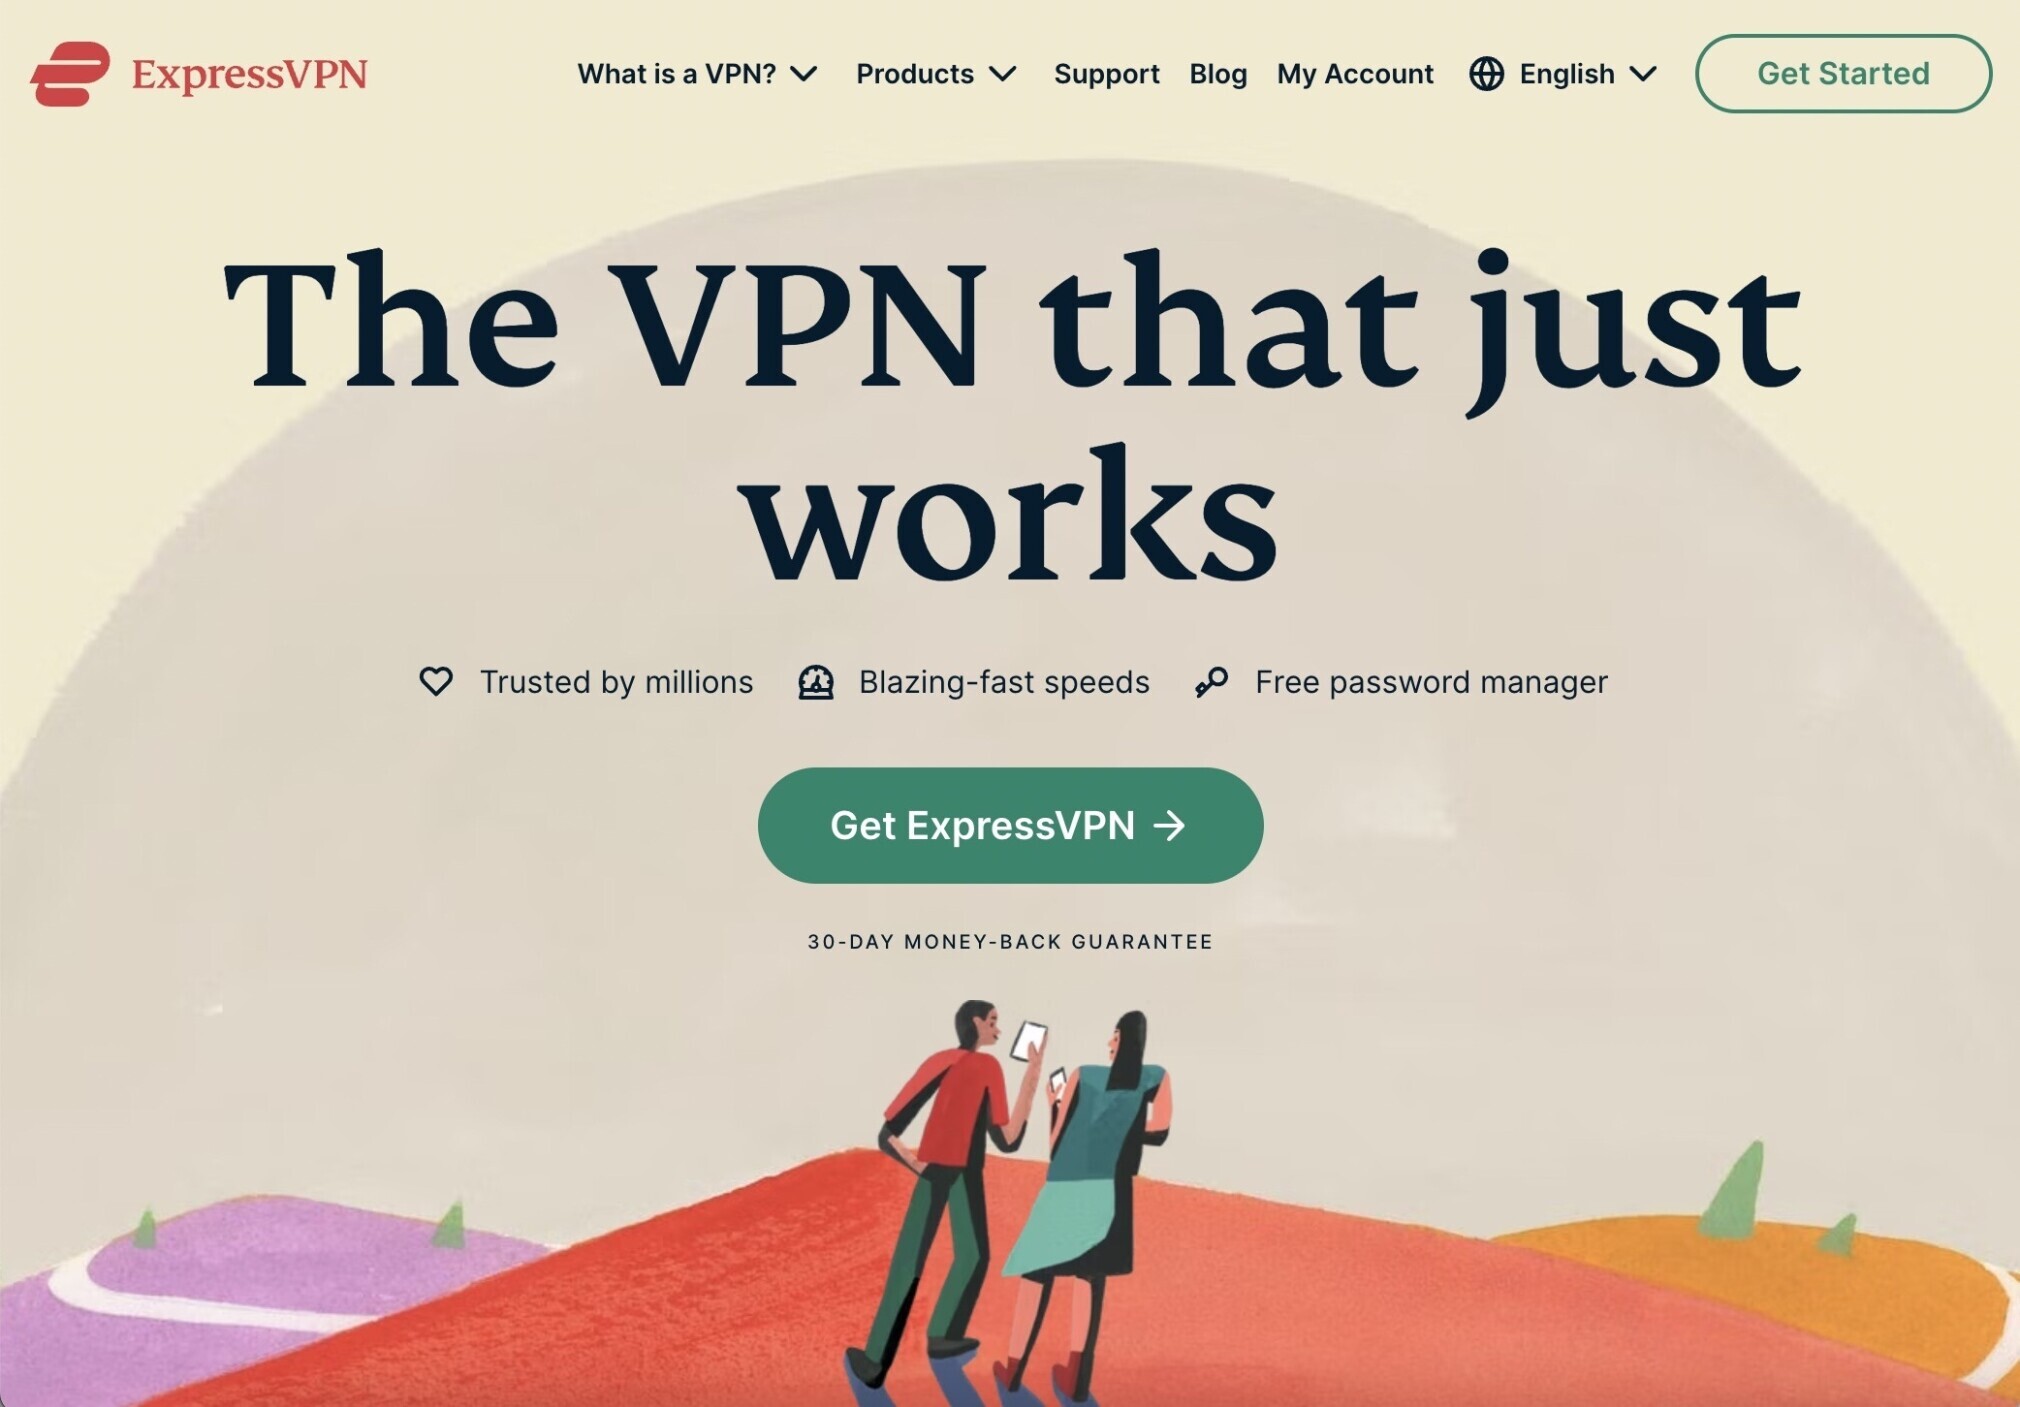 ExpressVPN's landing page with an illustration of two people on their phones on top of a hill